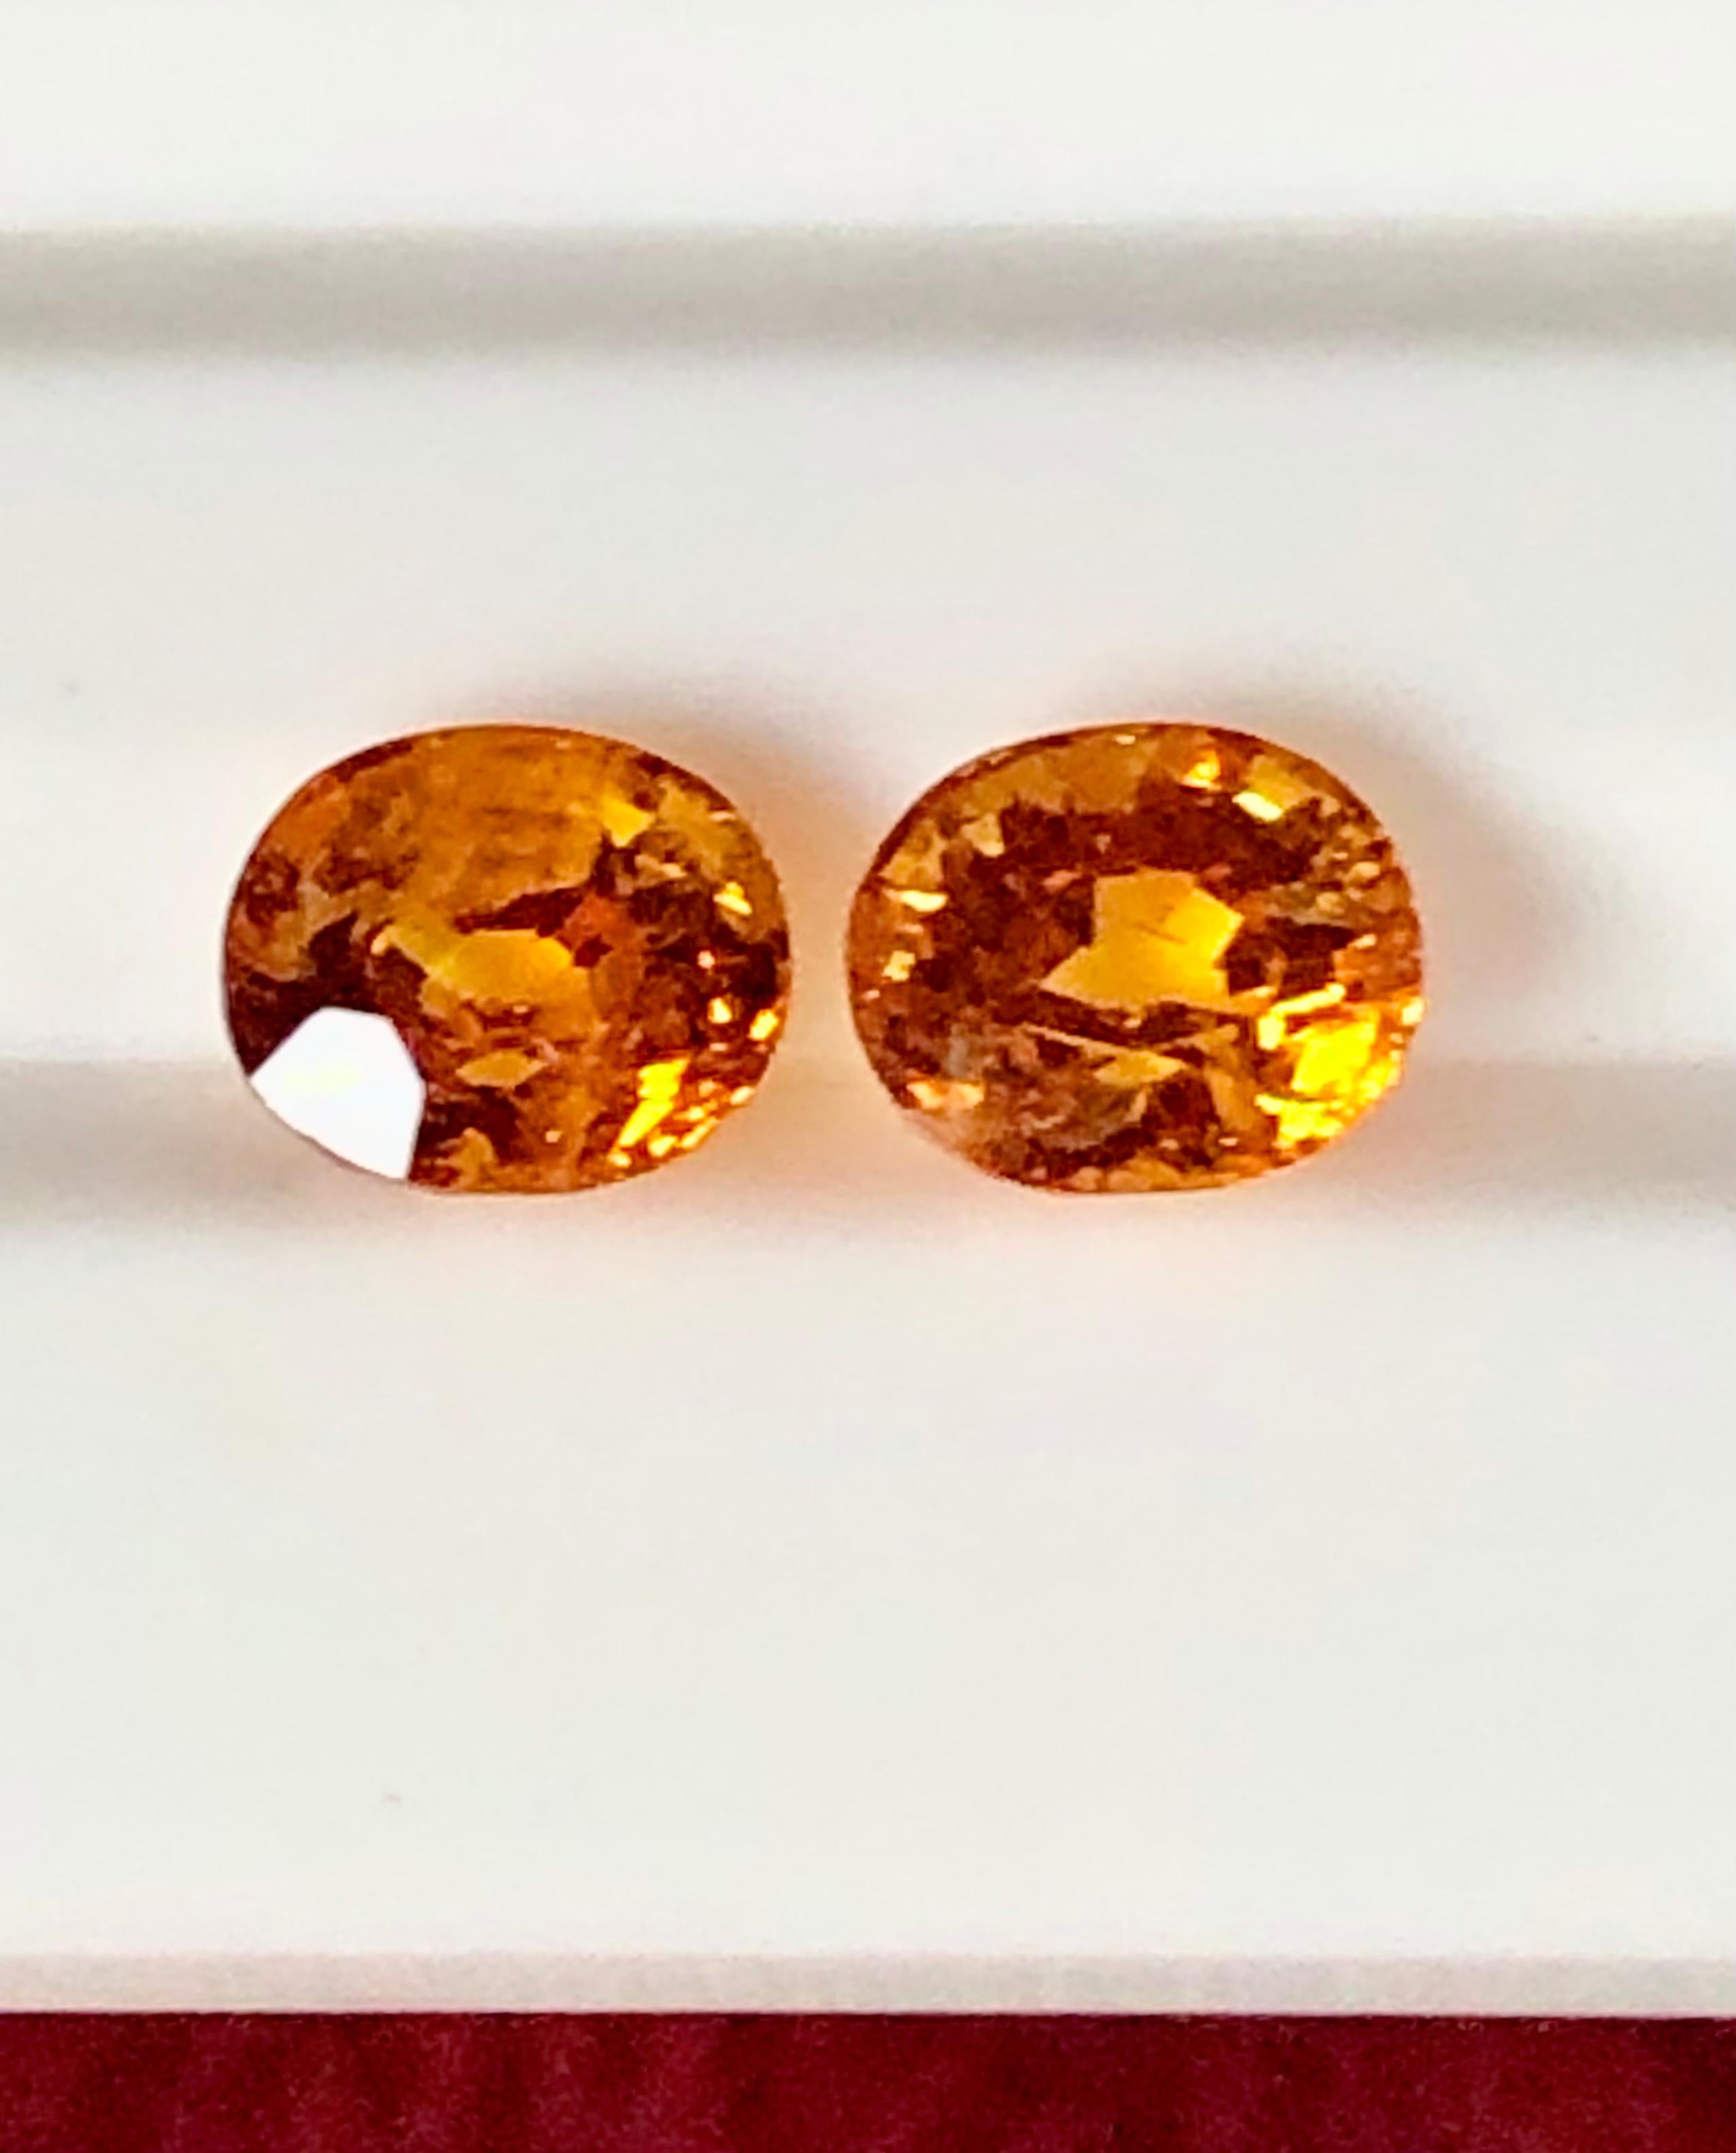 Natural Untreated pair of Mandarin Garnet oval gemstones, weighing a total of 5.80 carats, offered loose and design your own is available don't hesitate to contact us.
Measurements: 8.35mm x 7.16mm each.
Can be made in stunning jewels!
**The price